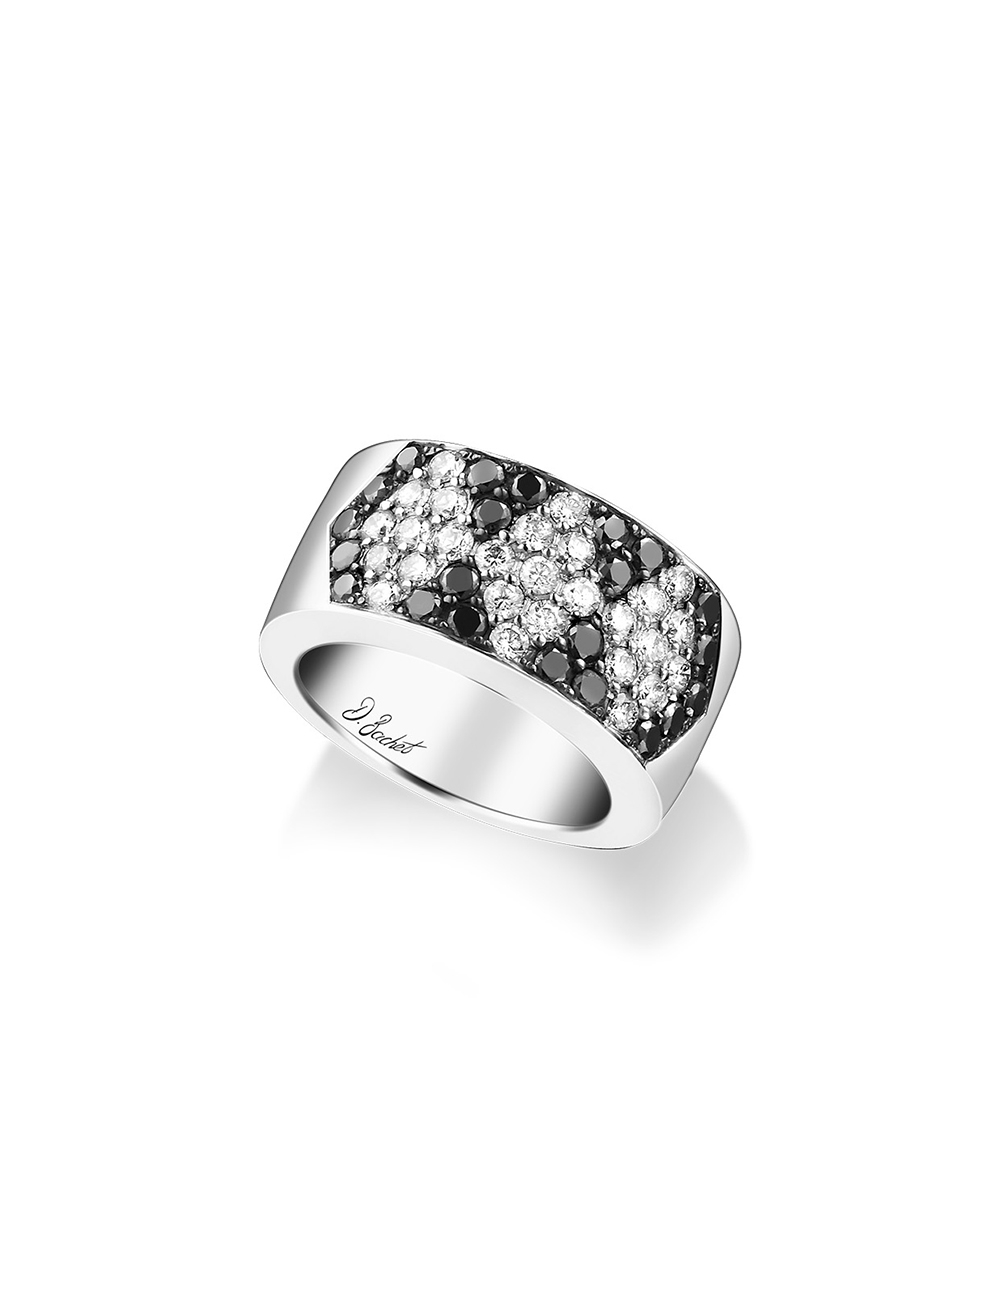 Charleston Women's Ring: Energy, Character, and Elegance - White and Black Diamond Pave.